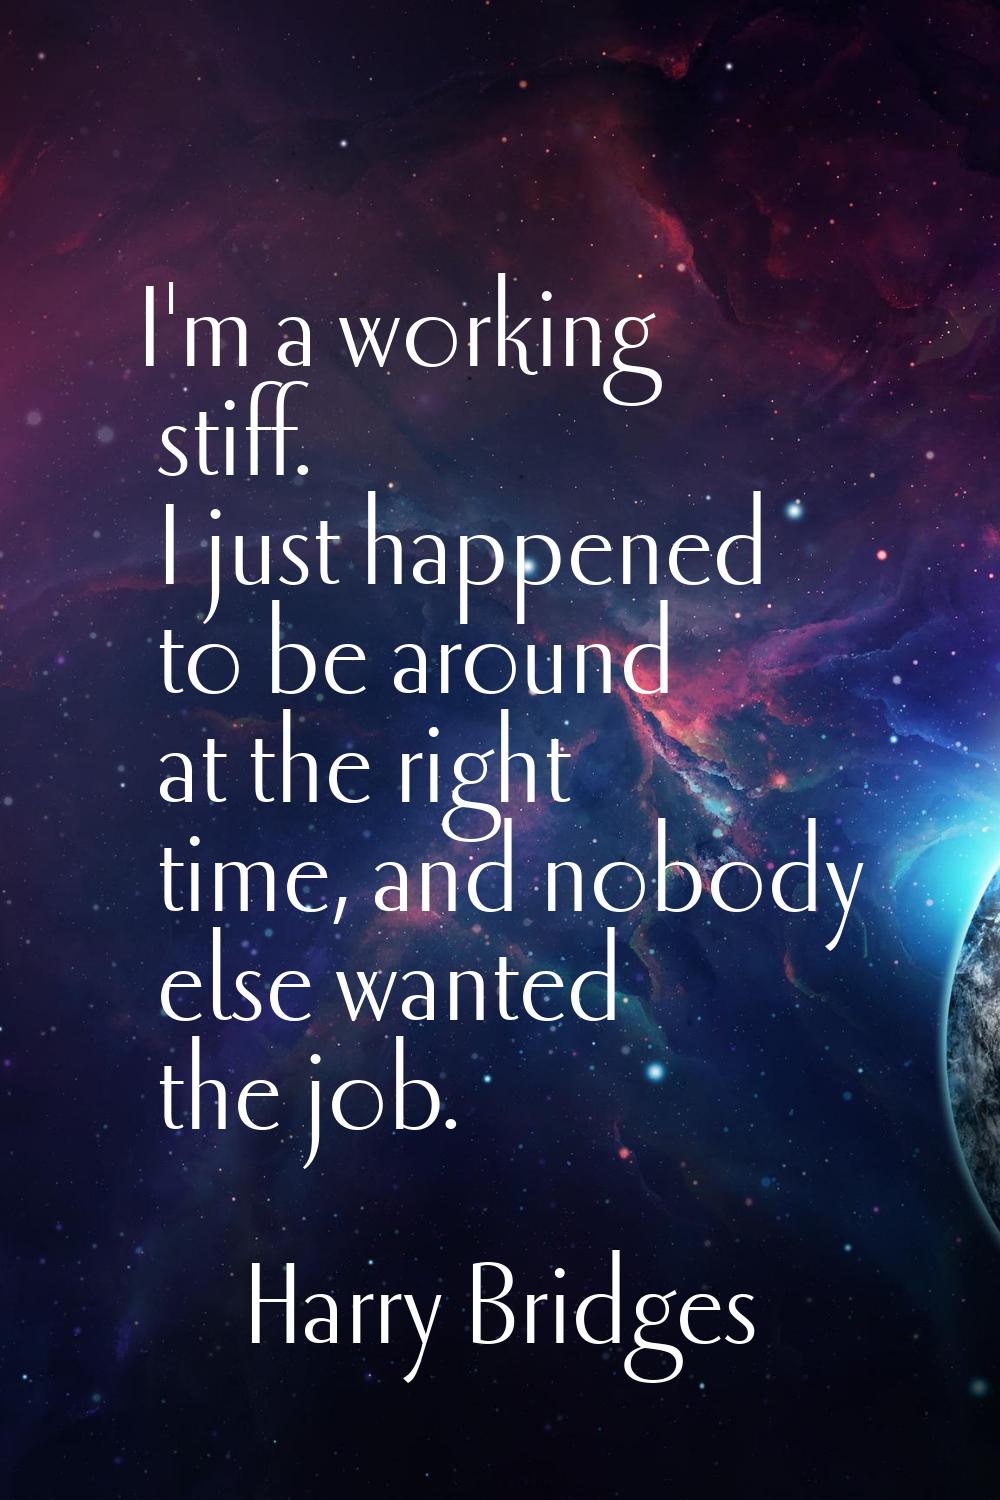 I'm a working stiff. I just happened to be around at the right time, and nobody else wanted the job